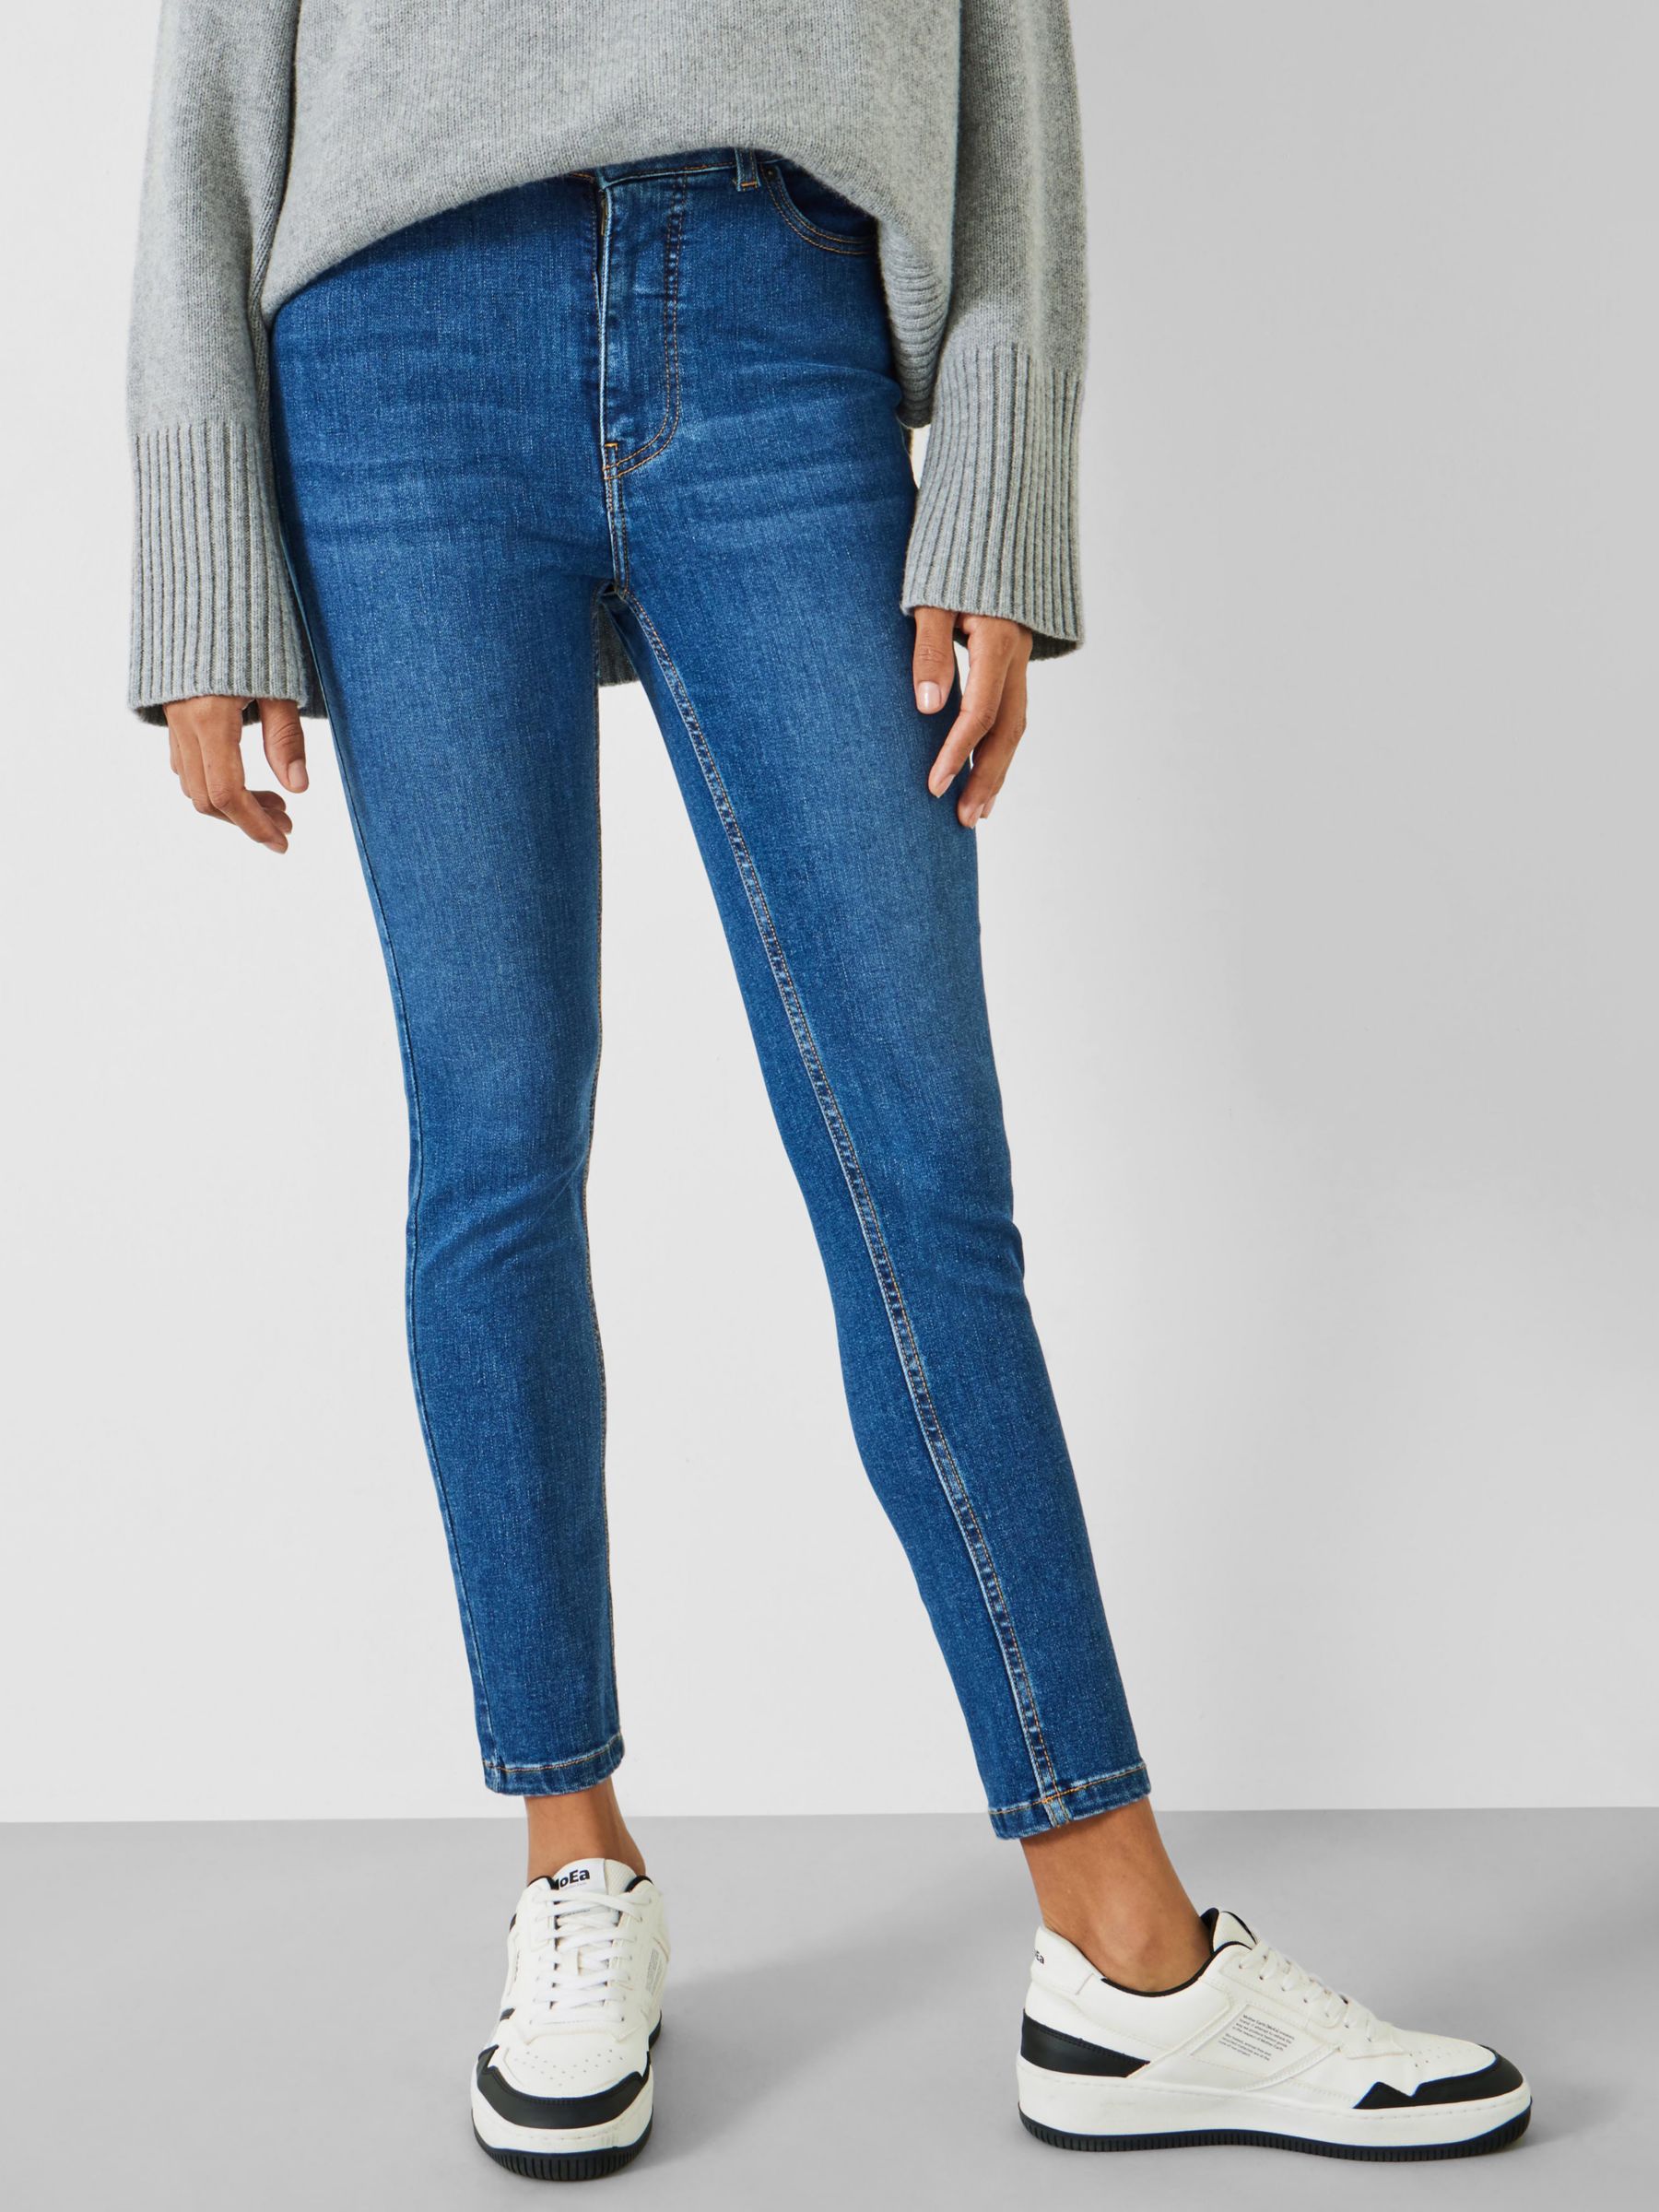 HUSH Erin Skinny Jeans, Blue Authentic at John Lewis & Partners